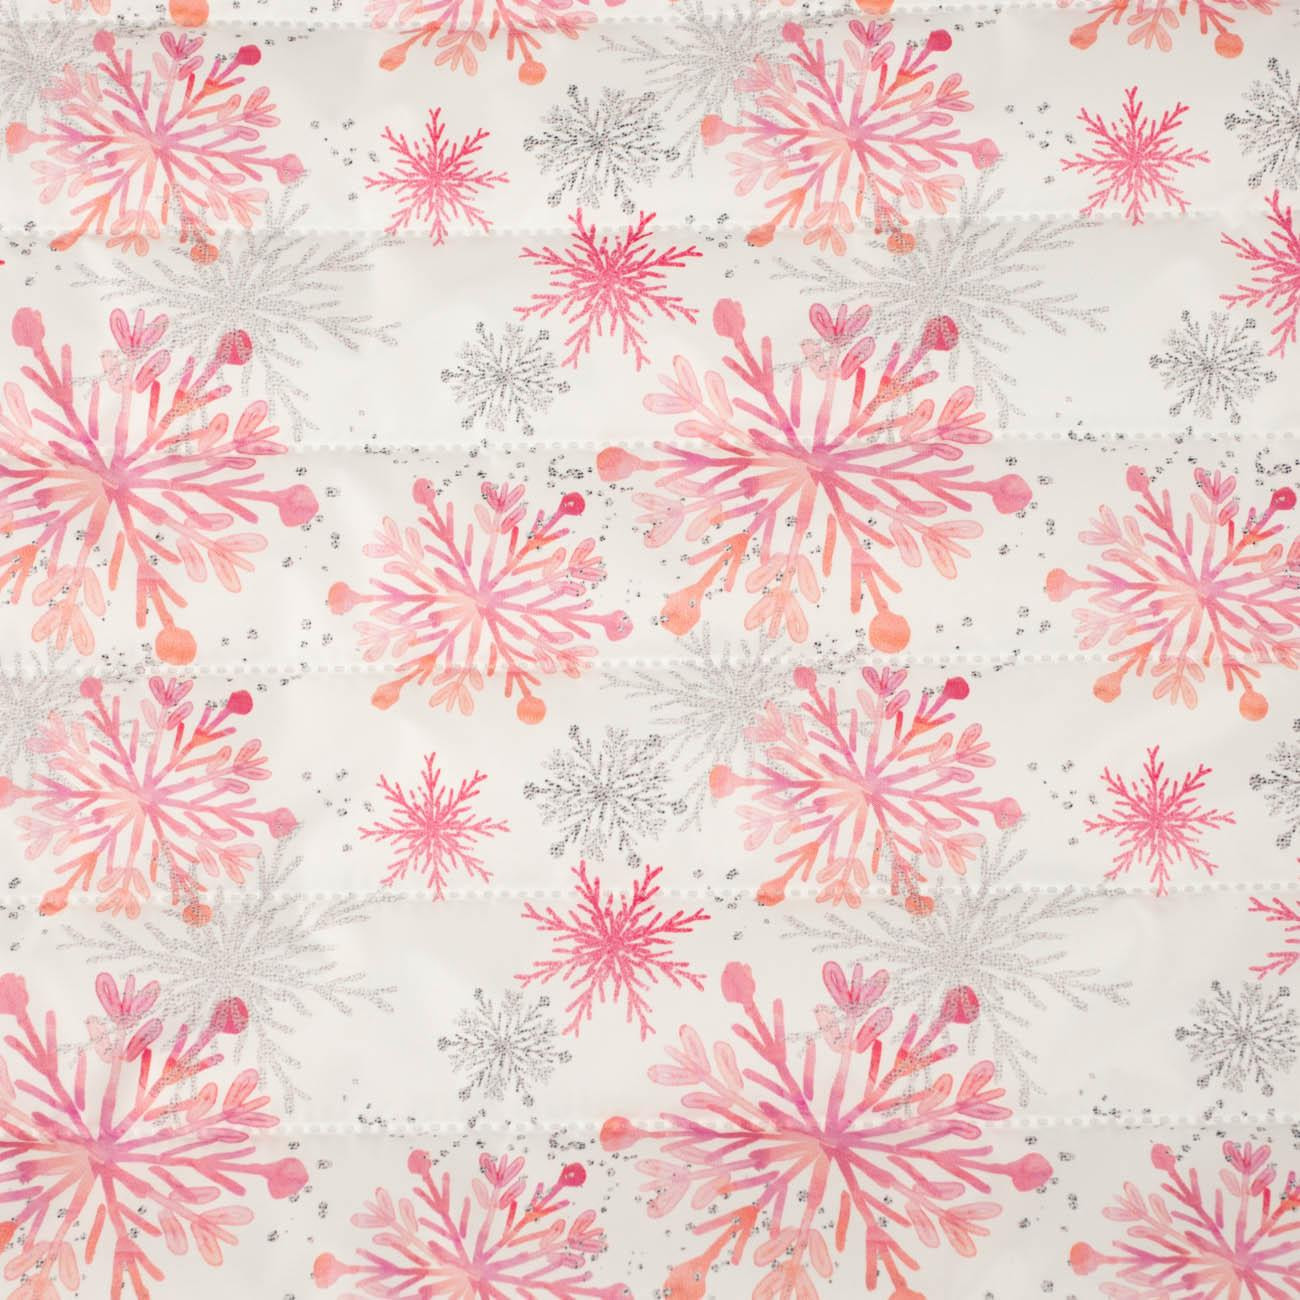 PINK SNOWFLAKES pat. 2 - nylon fabric quilted in stripes